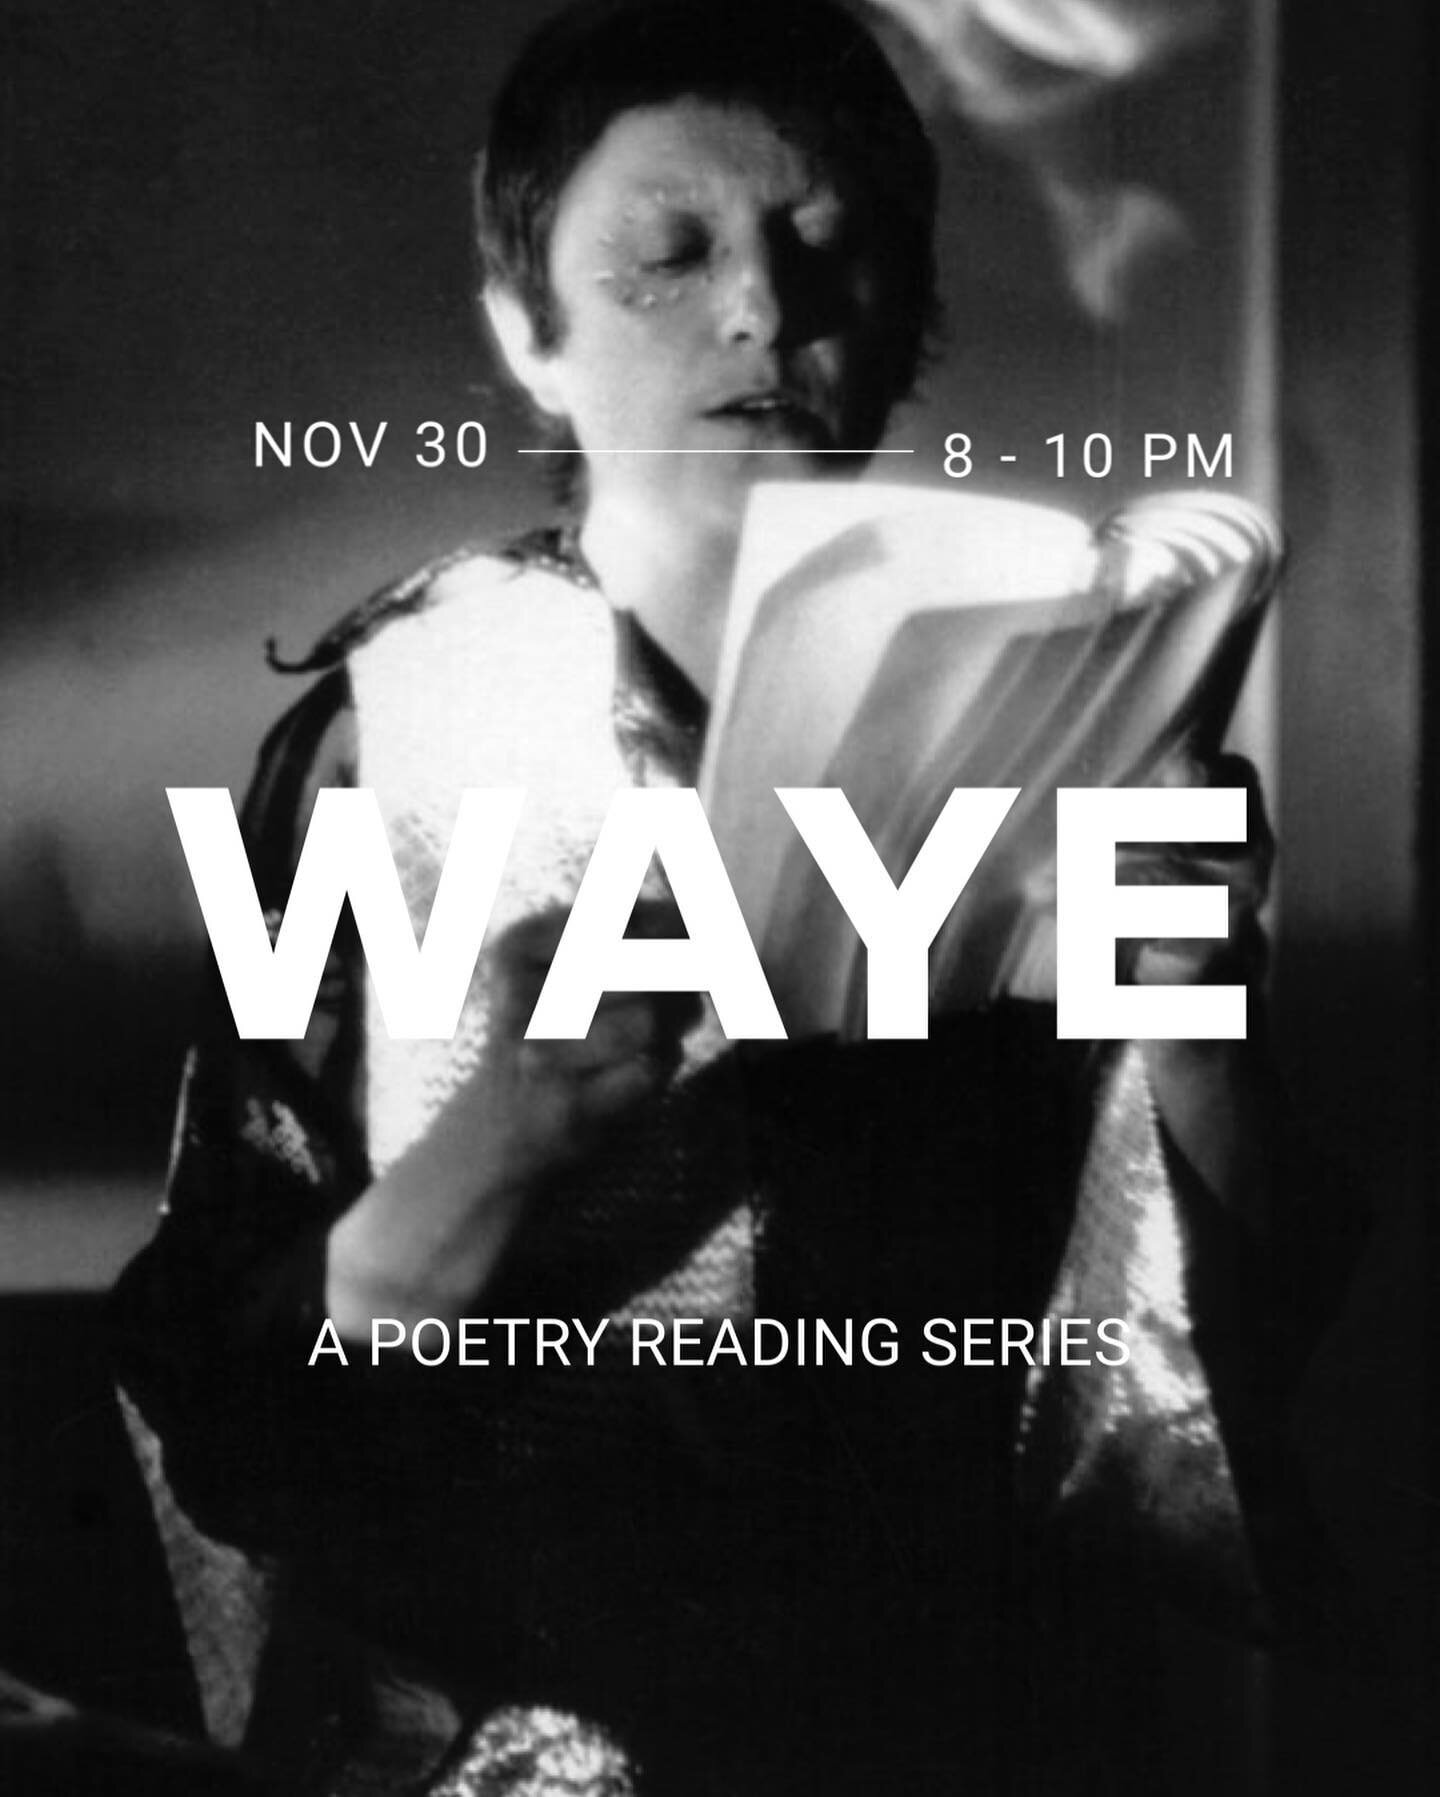 WAYE: A Poetry Reading Series is back in action once again at Sure Things in Jersey City Heights on Wednesday, November 30th, so mark those calendars!

OUR FEATURE
This month, we're proud to present Jersey City-based poet and musician Gabriel V. Cumm